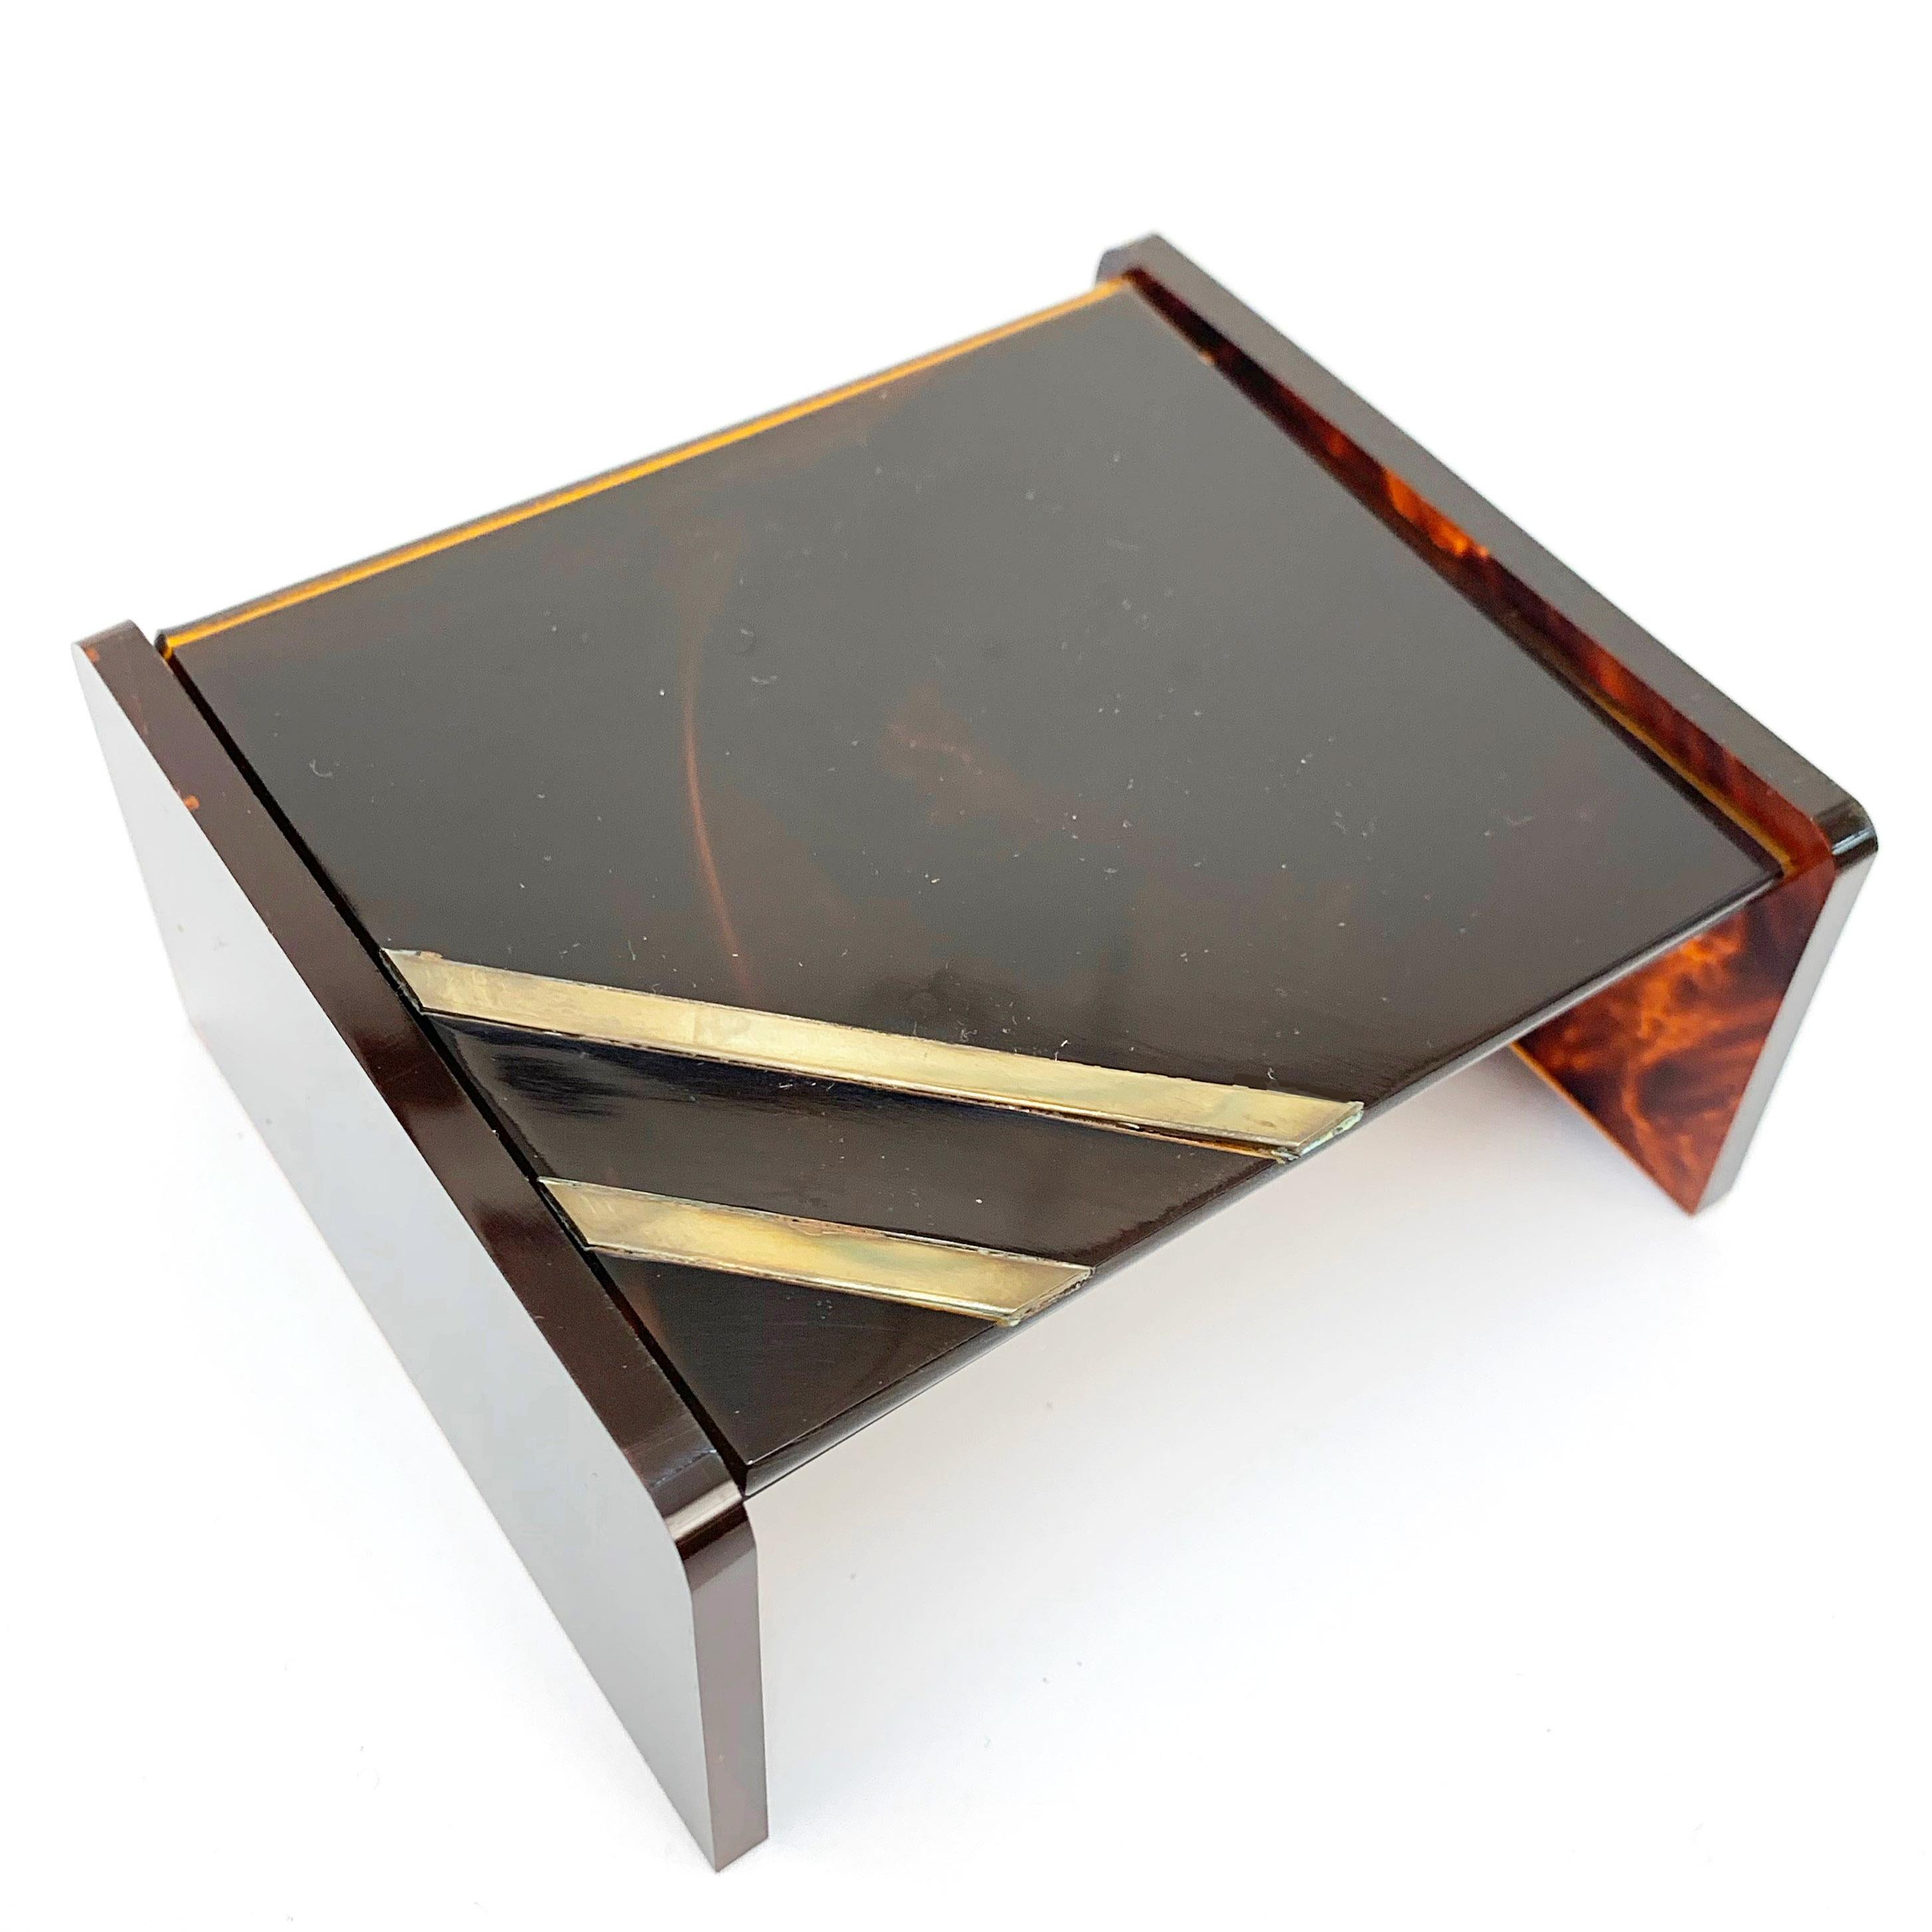 Midcentury Lucite, Tortoise Plexiglass and Brass Christian Dior Jewelry Box 1970 For Sale 3